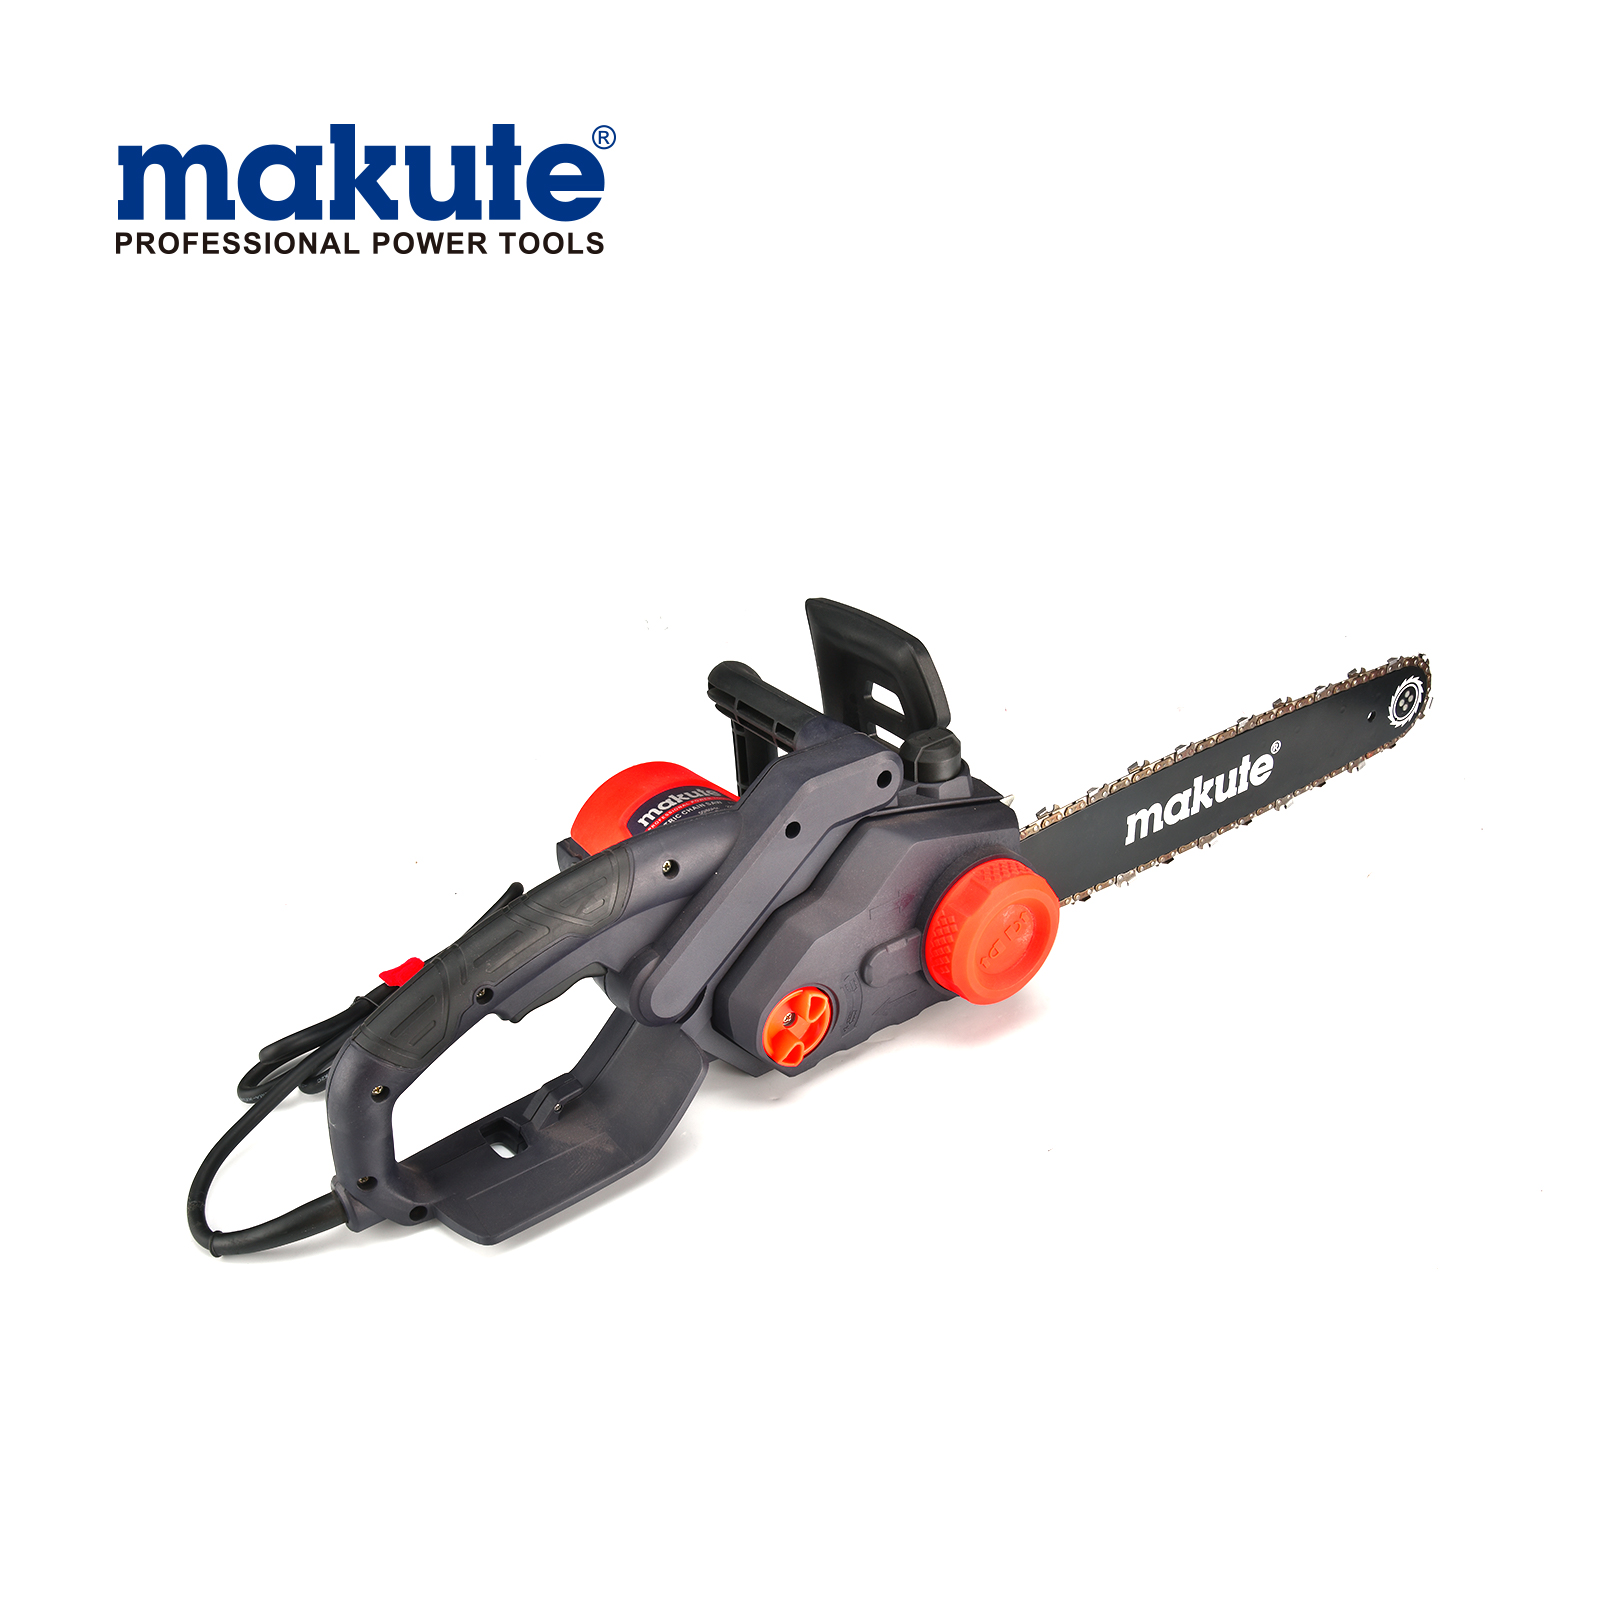 Makute corded Electric power tool 